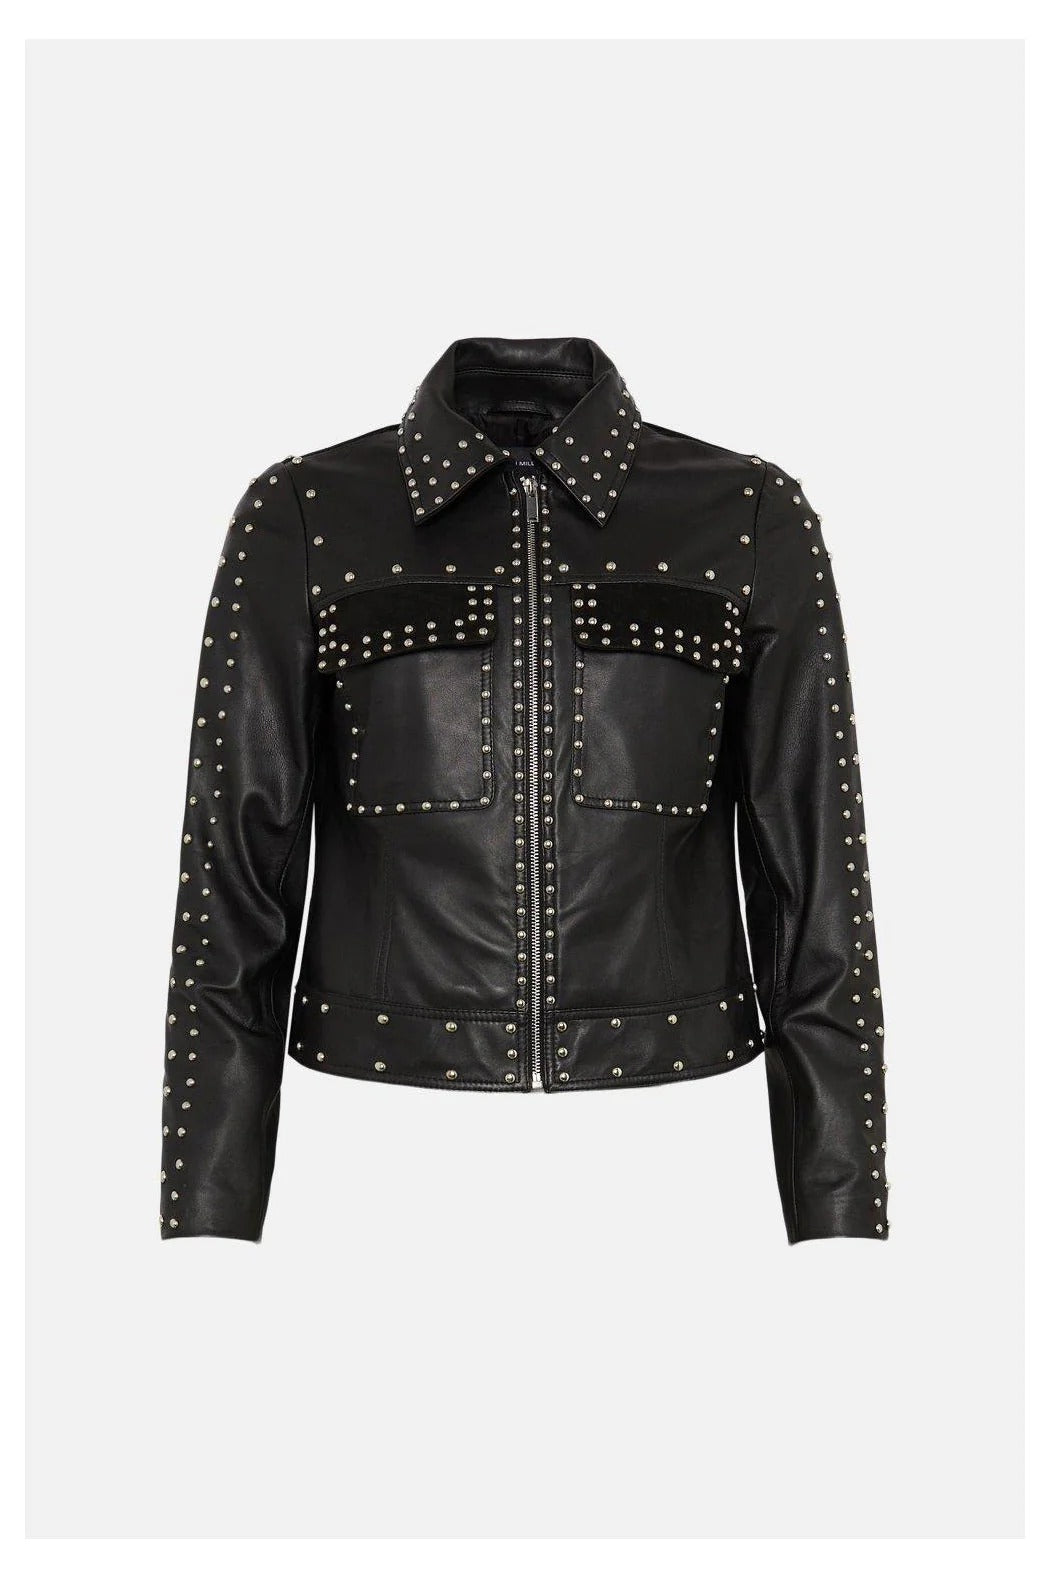 Chic Women's Black Silver Spiked Studded Motorcycle Leather Jacket